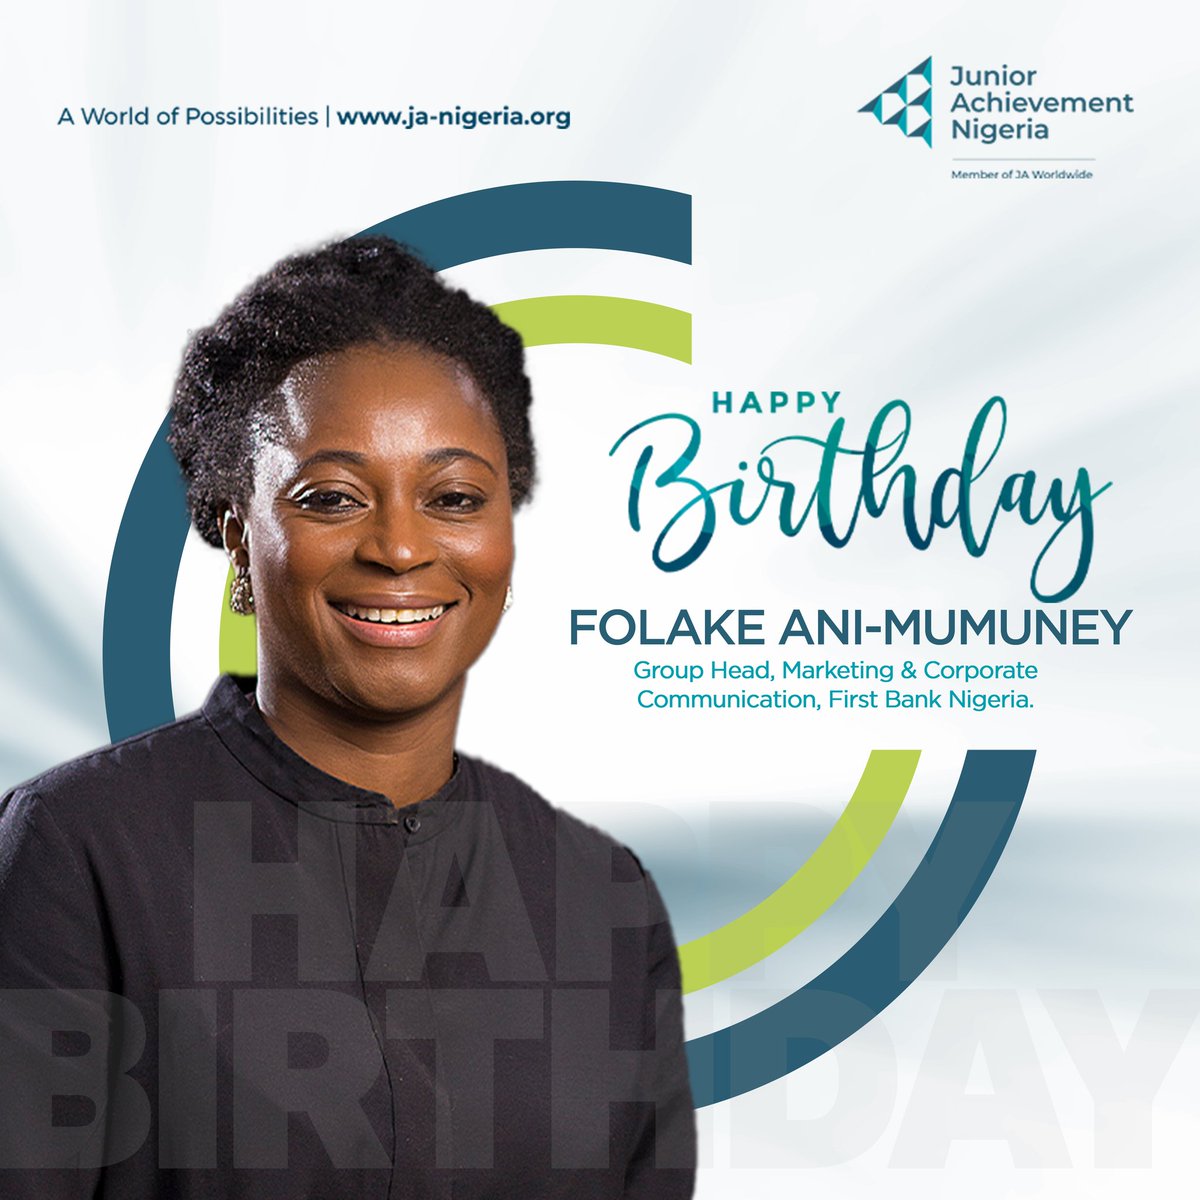 Happy birthday to our Board Vice Chair, Folake Ani-Mumuney 🎉

Thank you for your constant support in equipping young people across Nigeria with the skills needed to thrive in today's world.

We wish you many more years of success to come.

#HappyBirthday #FirstBank #JANigeria